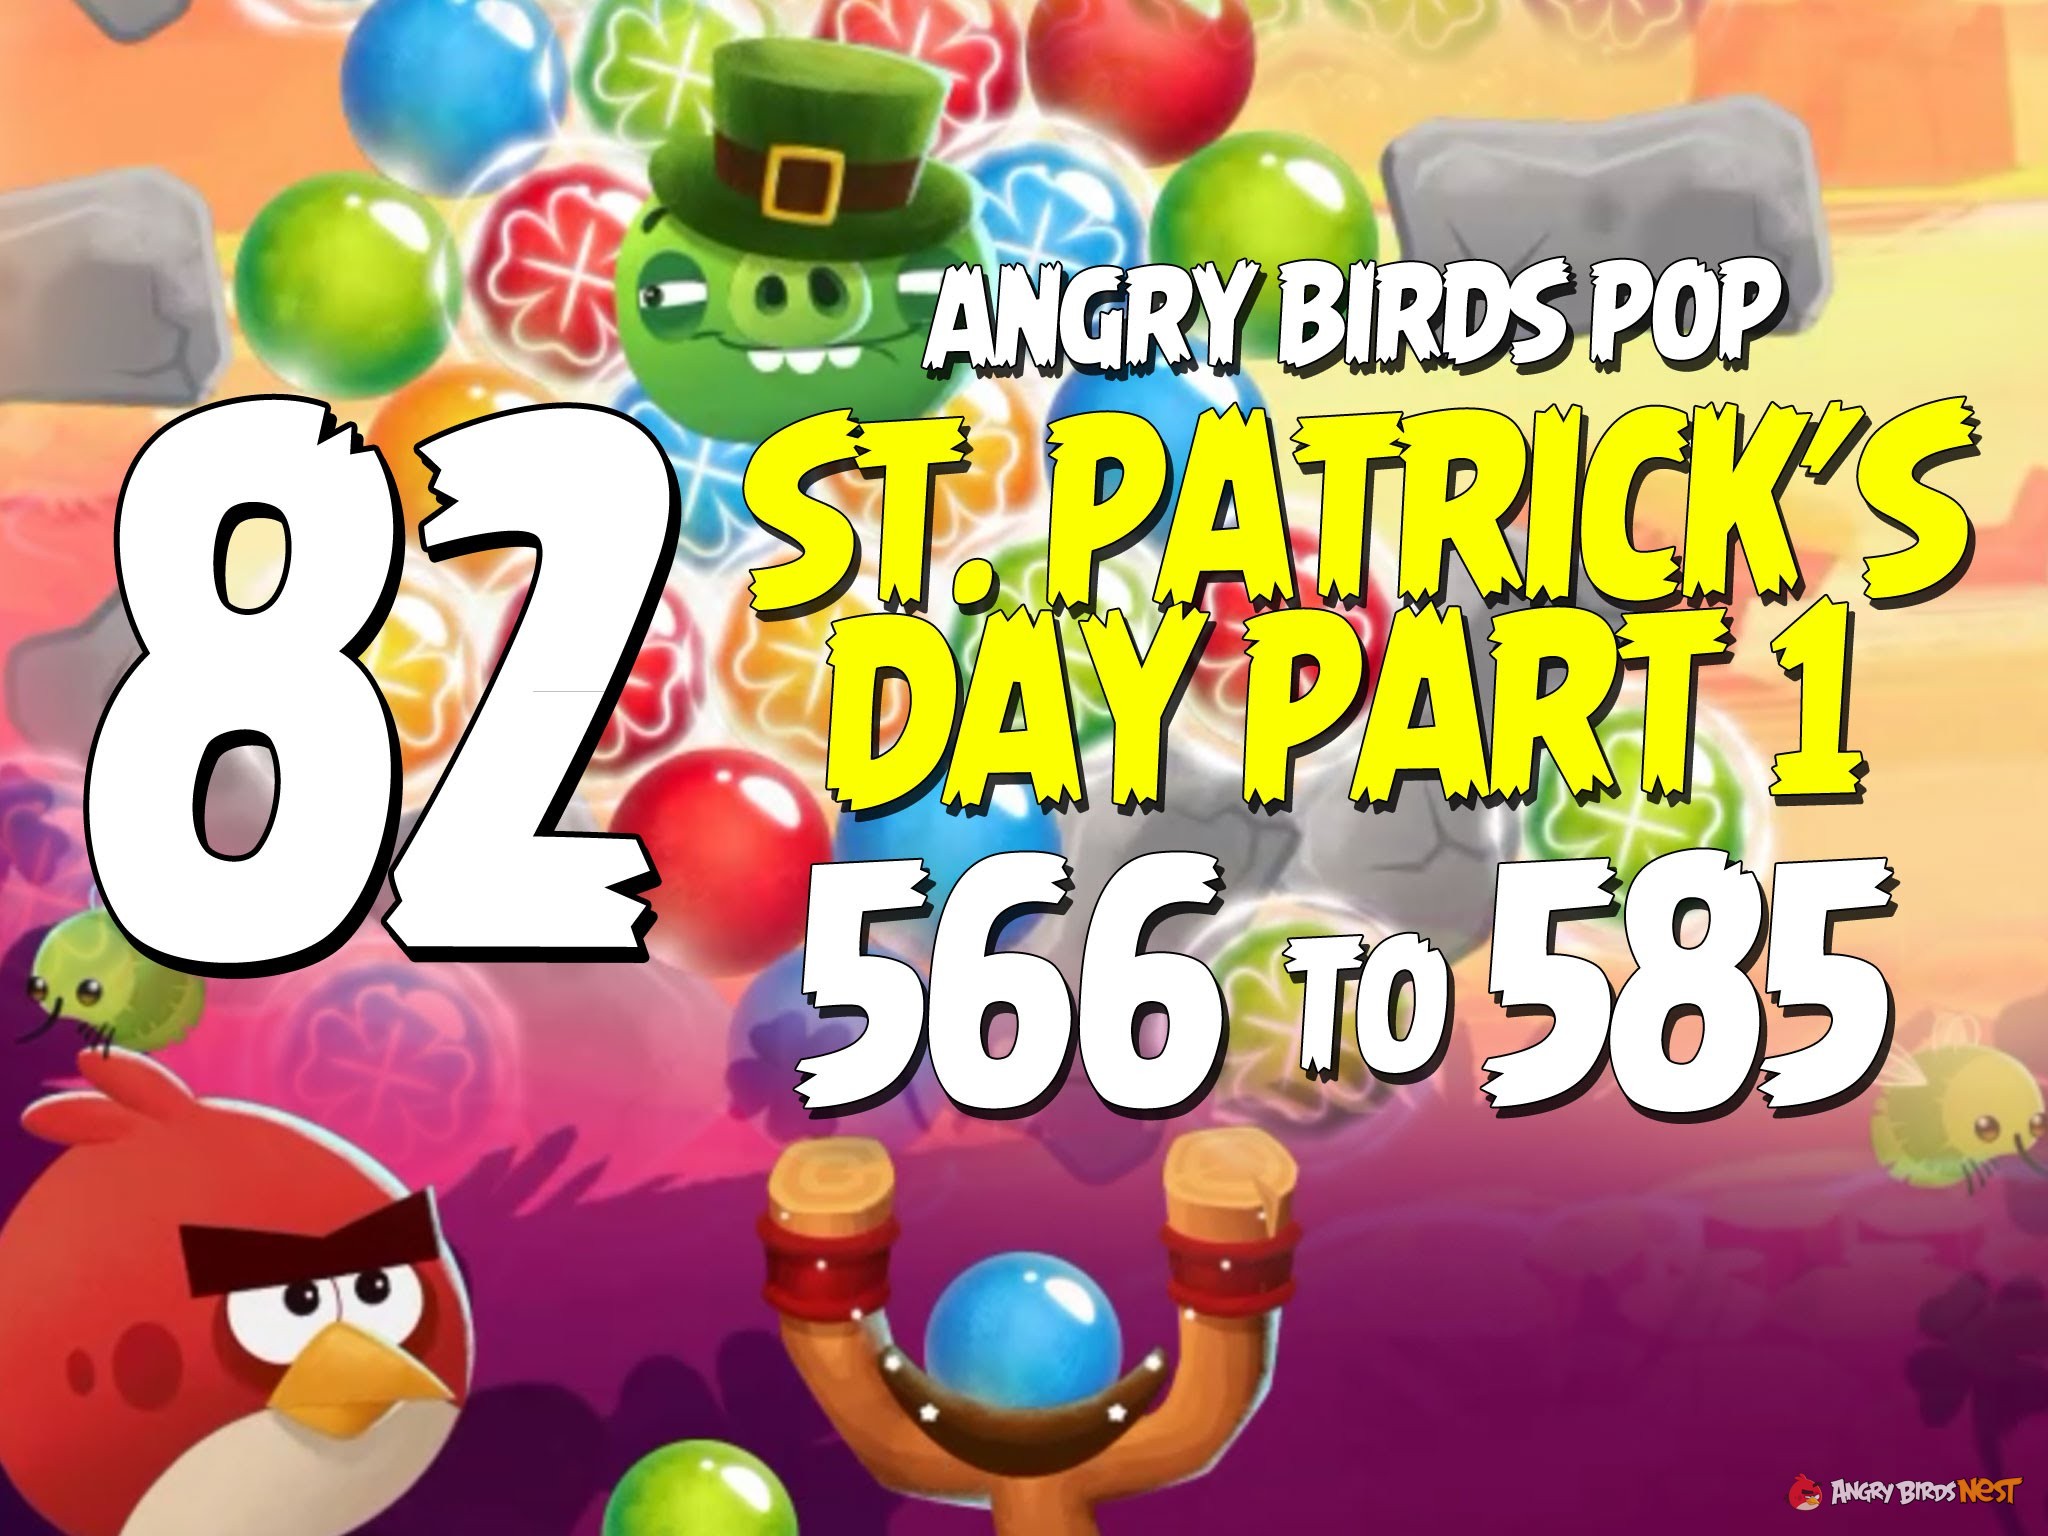 Angry Birds Pop Part 82 - Levels 566 to 585 - St Patricks Day Part 2